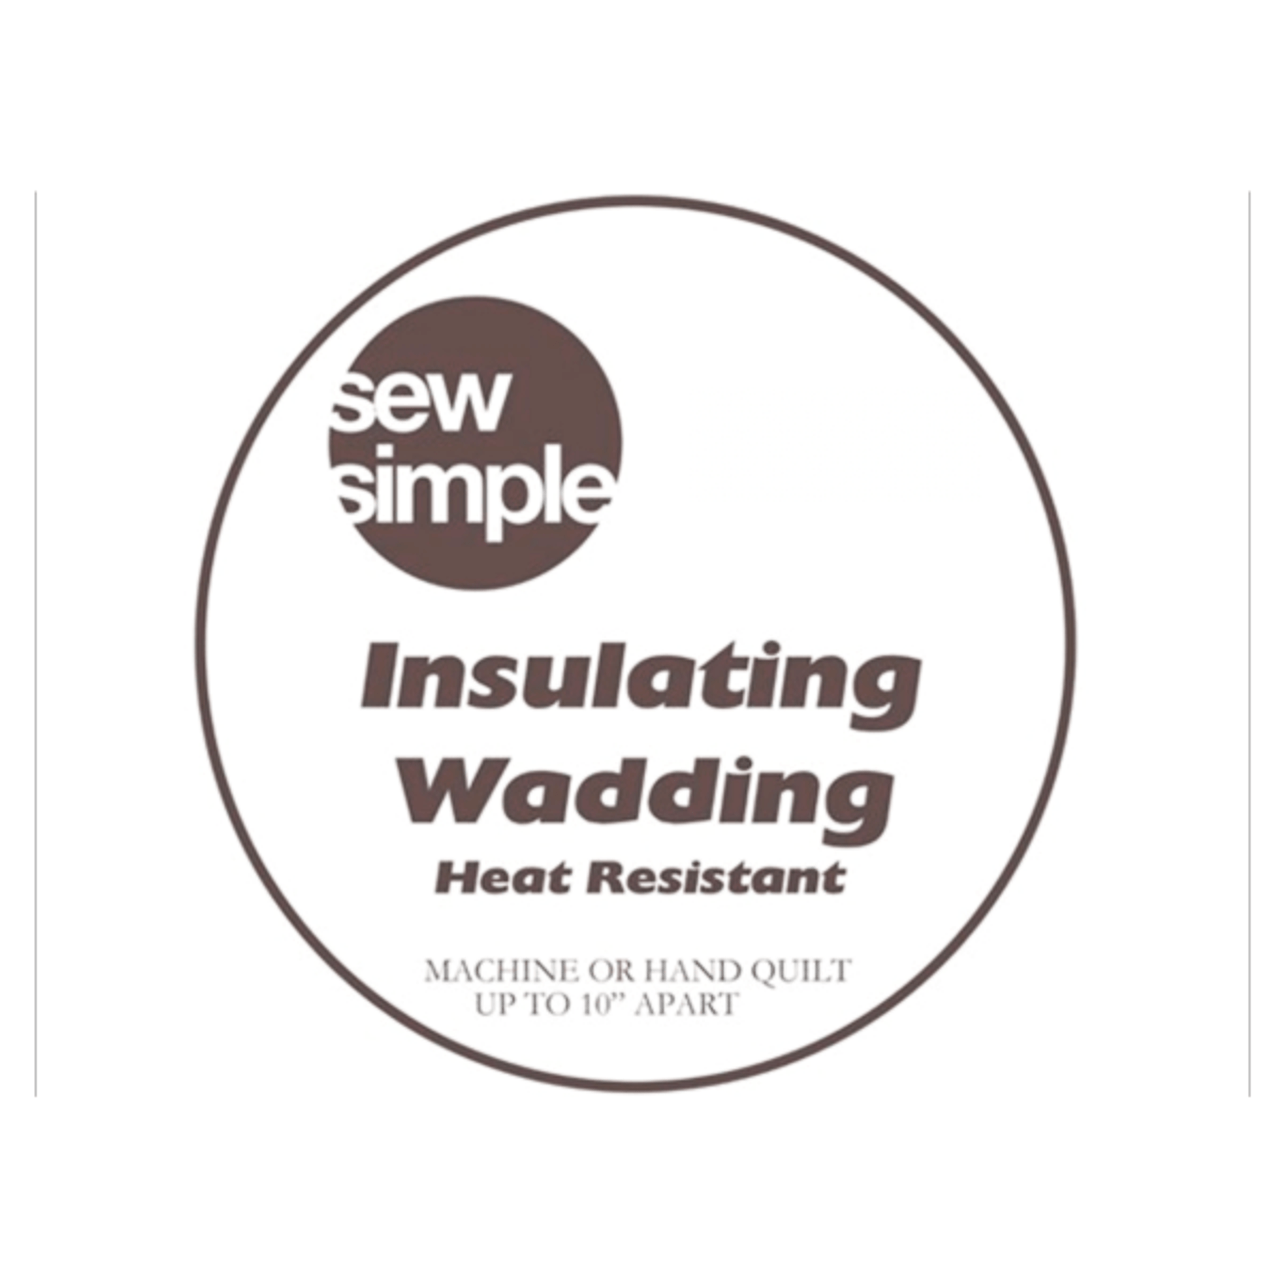 Insulating Wadding remnants by Sew Simple